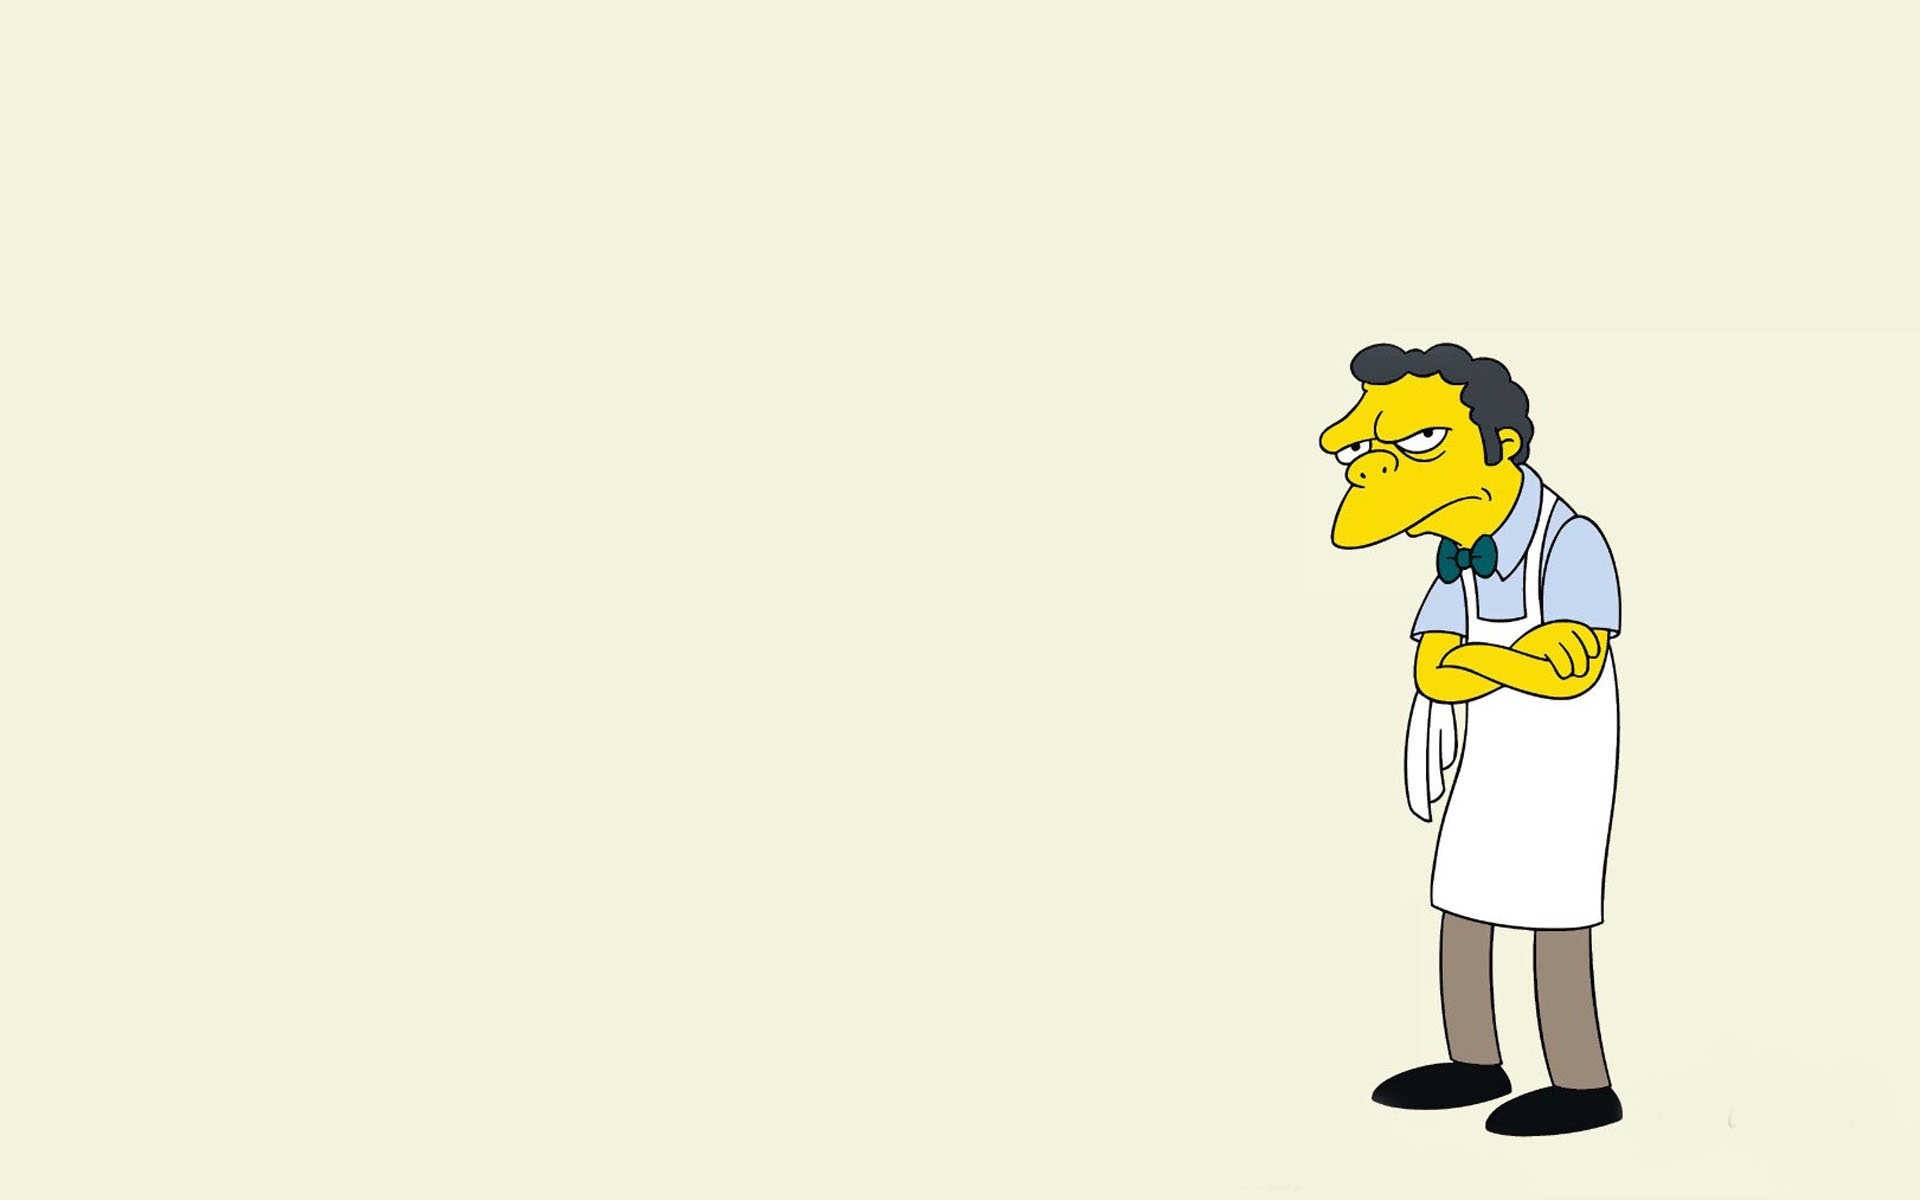 Simpsons Cartoon Design Free PPT Backgrounds for your PowerPoint